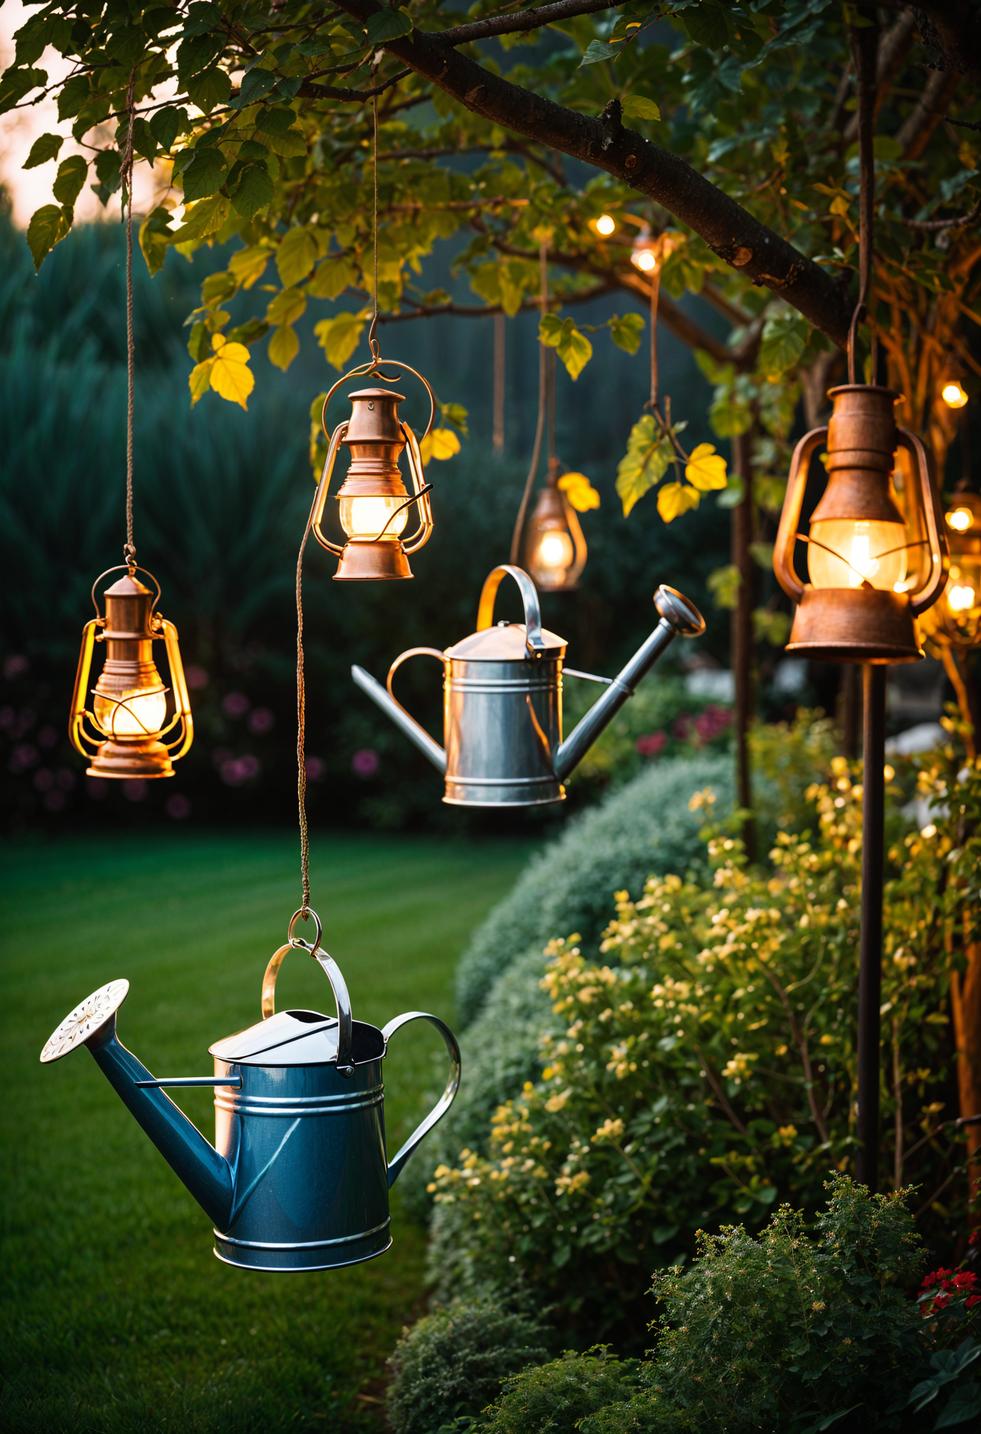 7. Upcycled Garden Lanterns from Cans-0